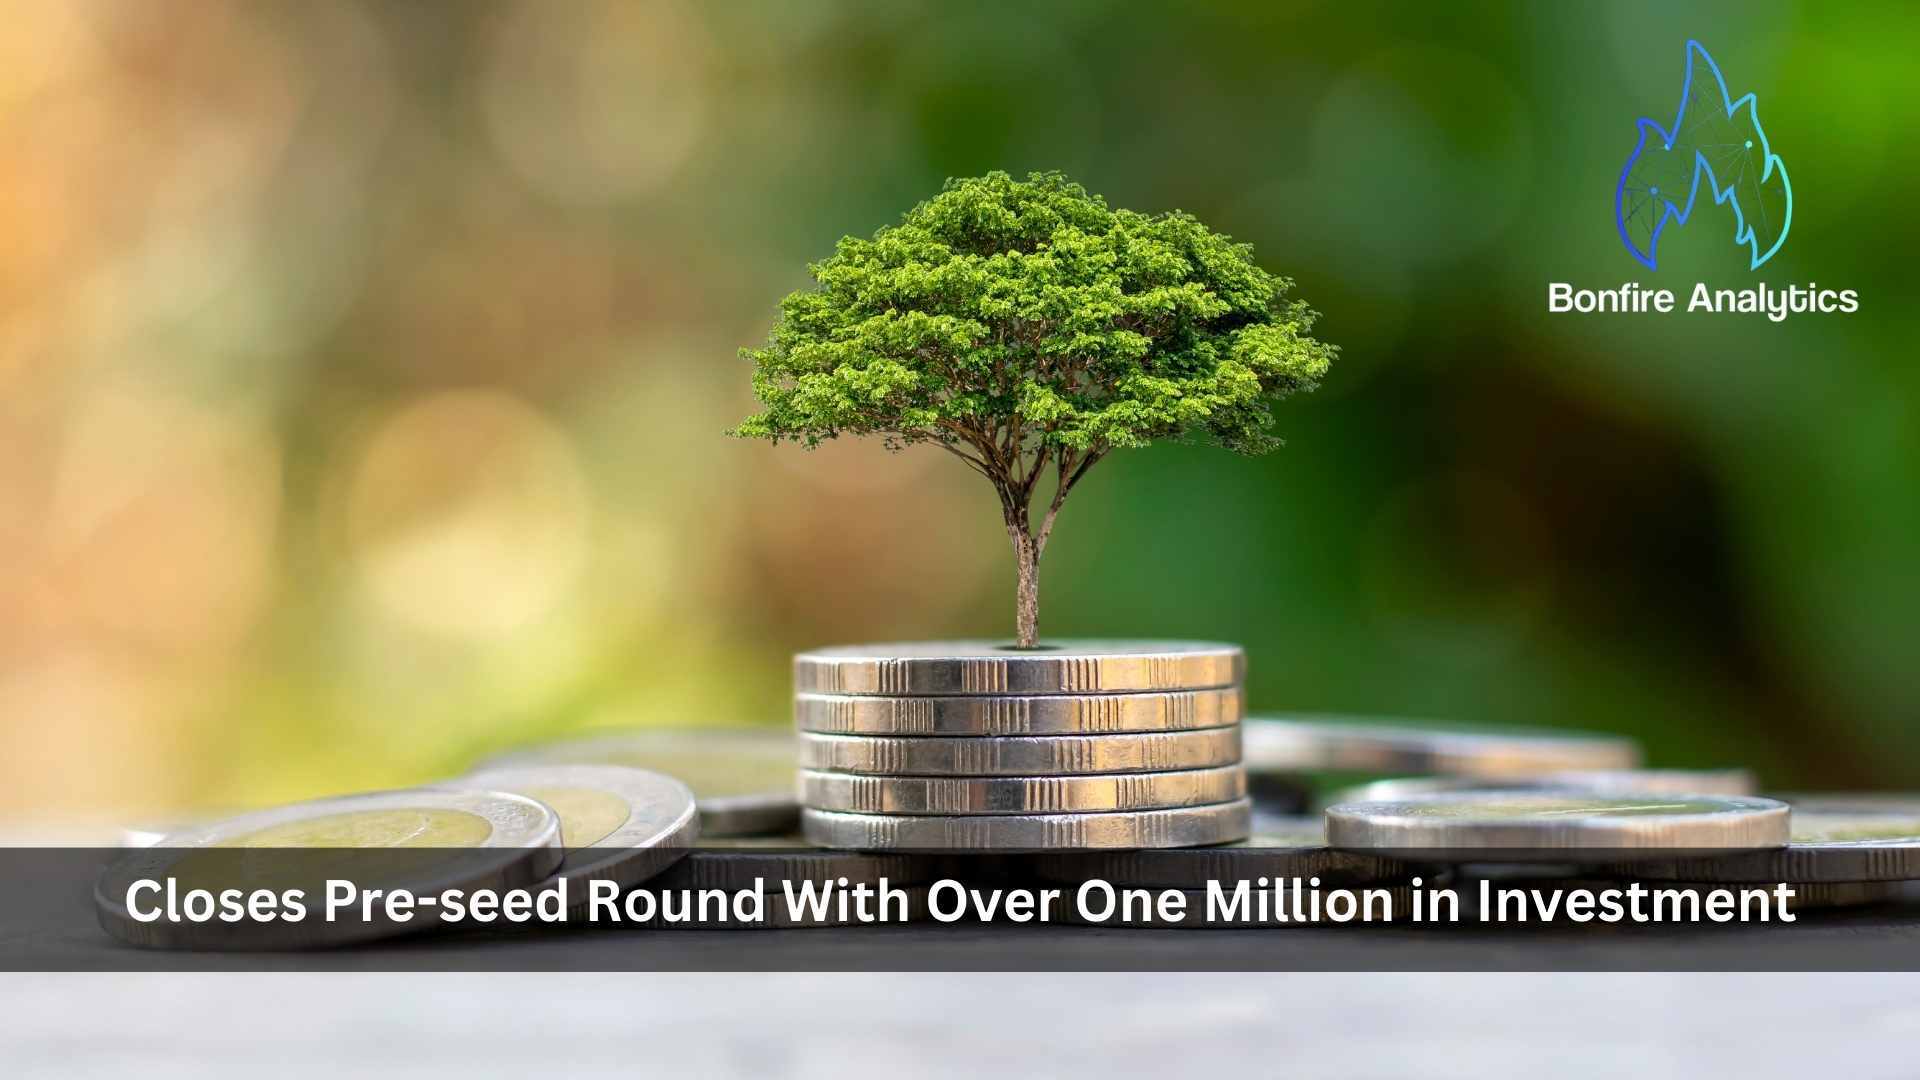 Bonfire Analytics, an AI-driven lead generation platform, closes pre-seed round with over one million in investment